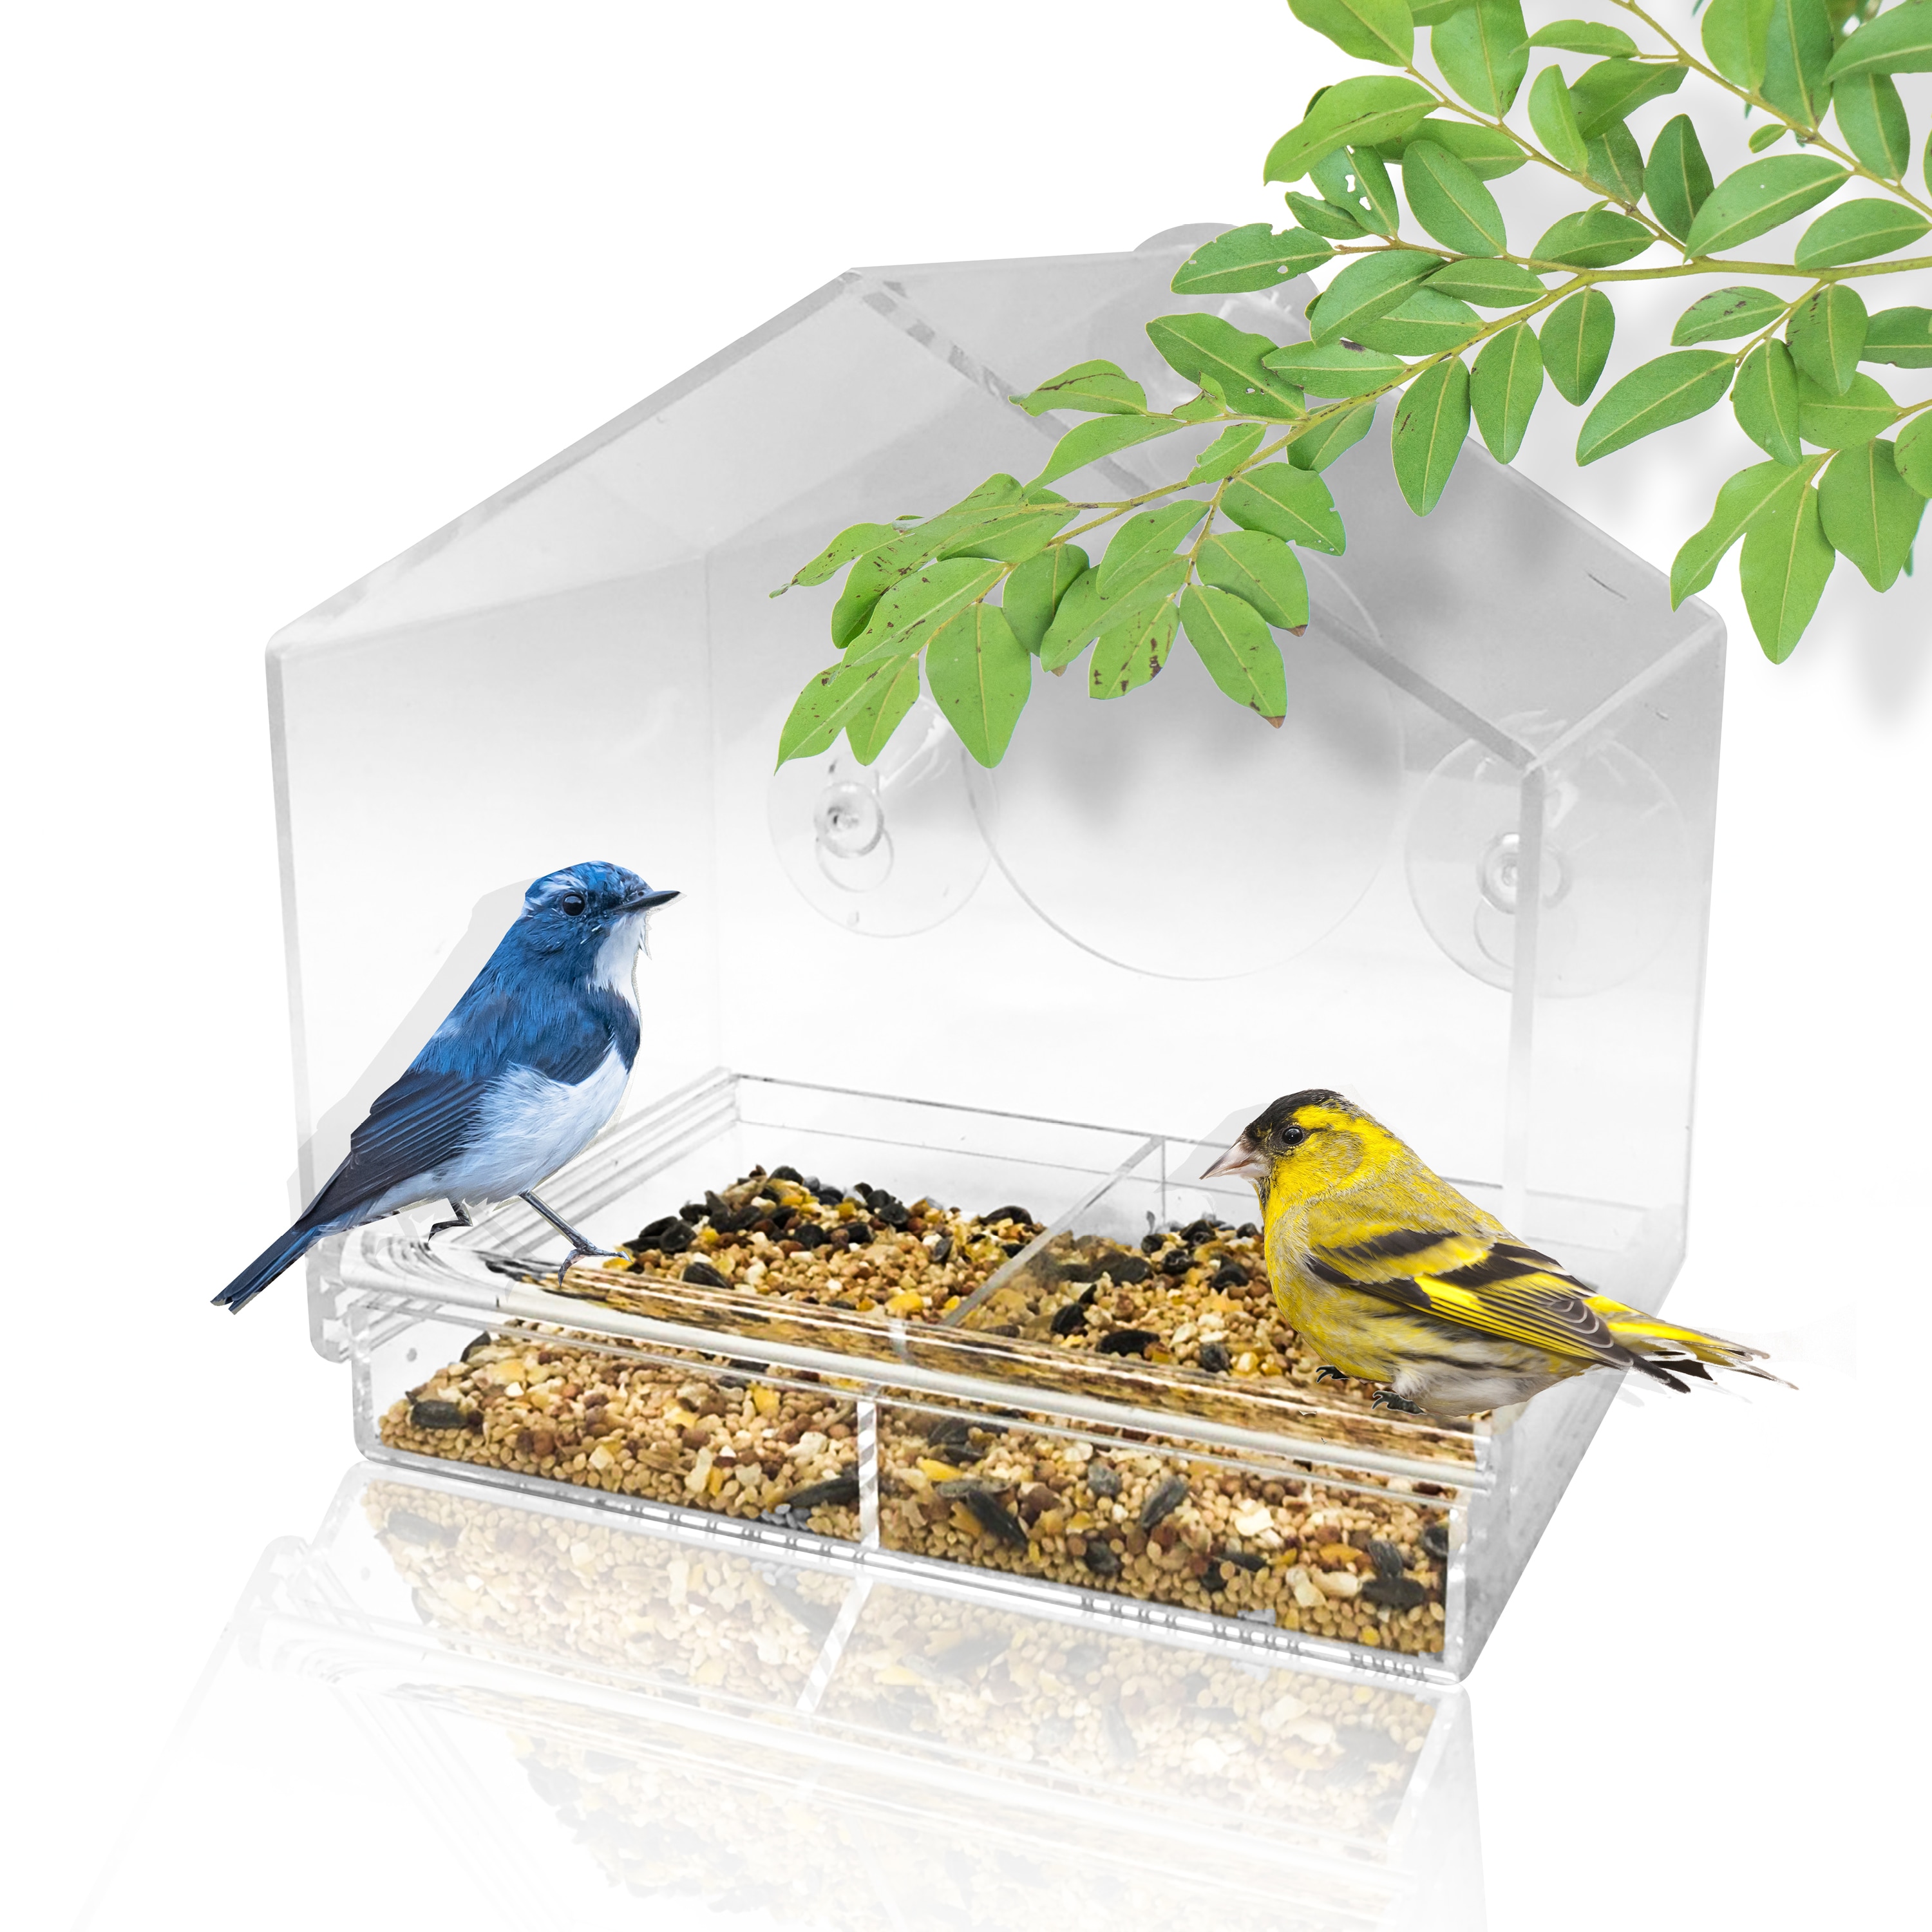 WLLKOO Window Bird Feeder, Bird House for Outside with 2 Rod, Small Acrylic  Window Bird Feeder with Strong Suction Cups and Drain Holes 5.9 * 2.4 *